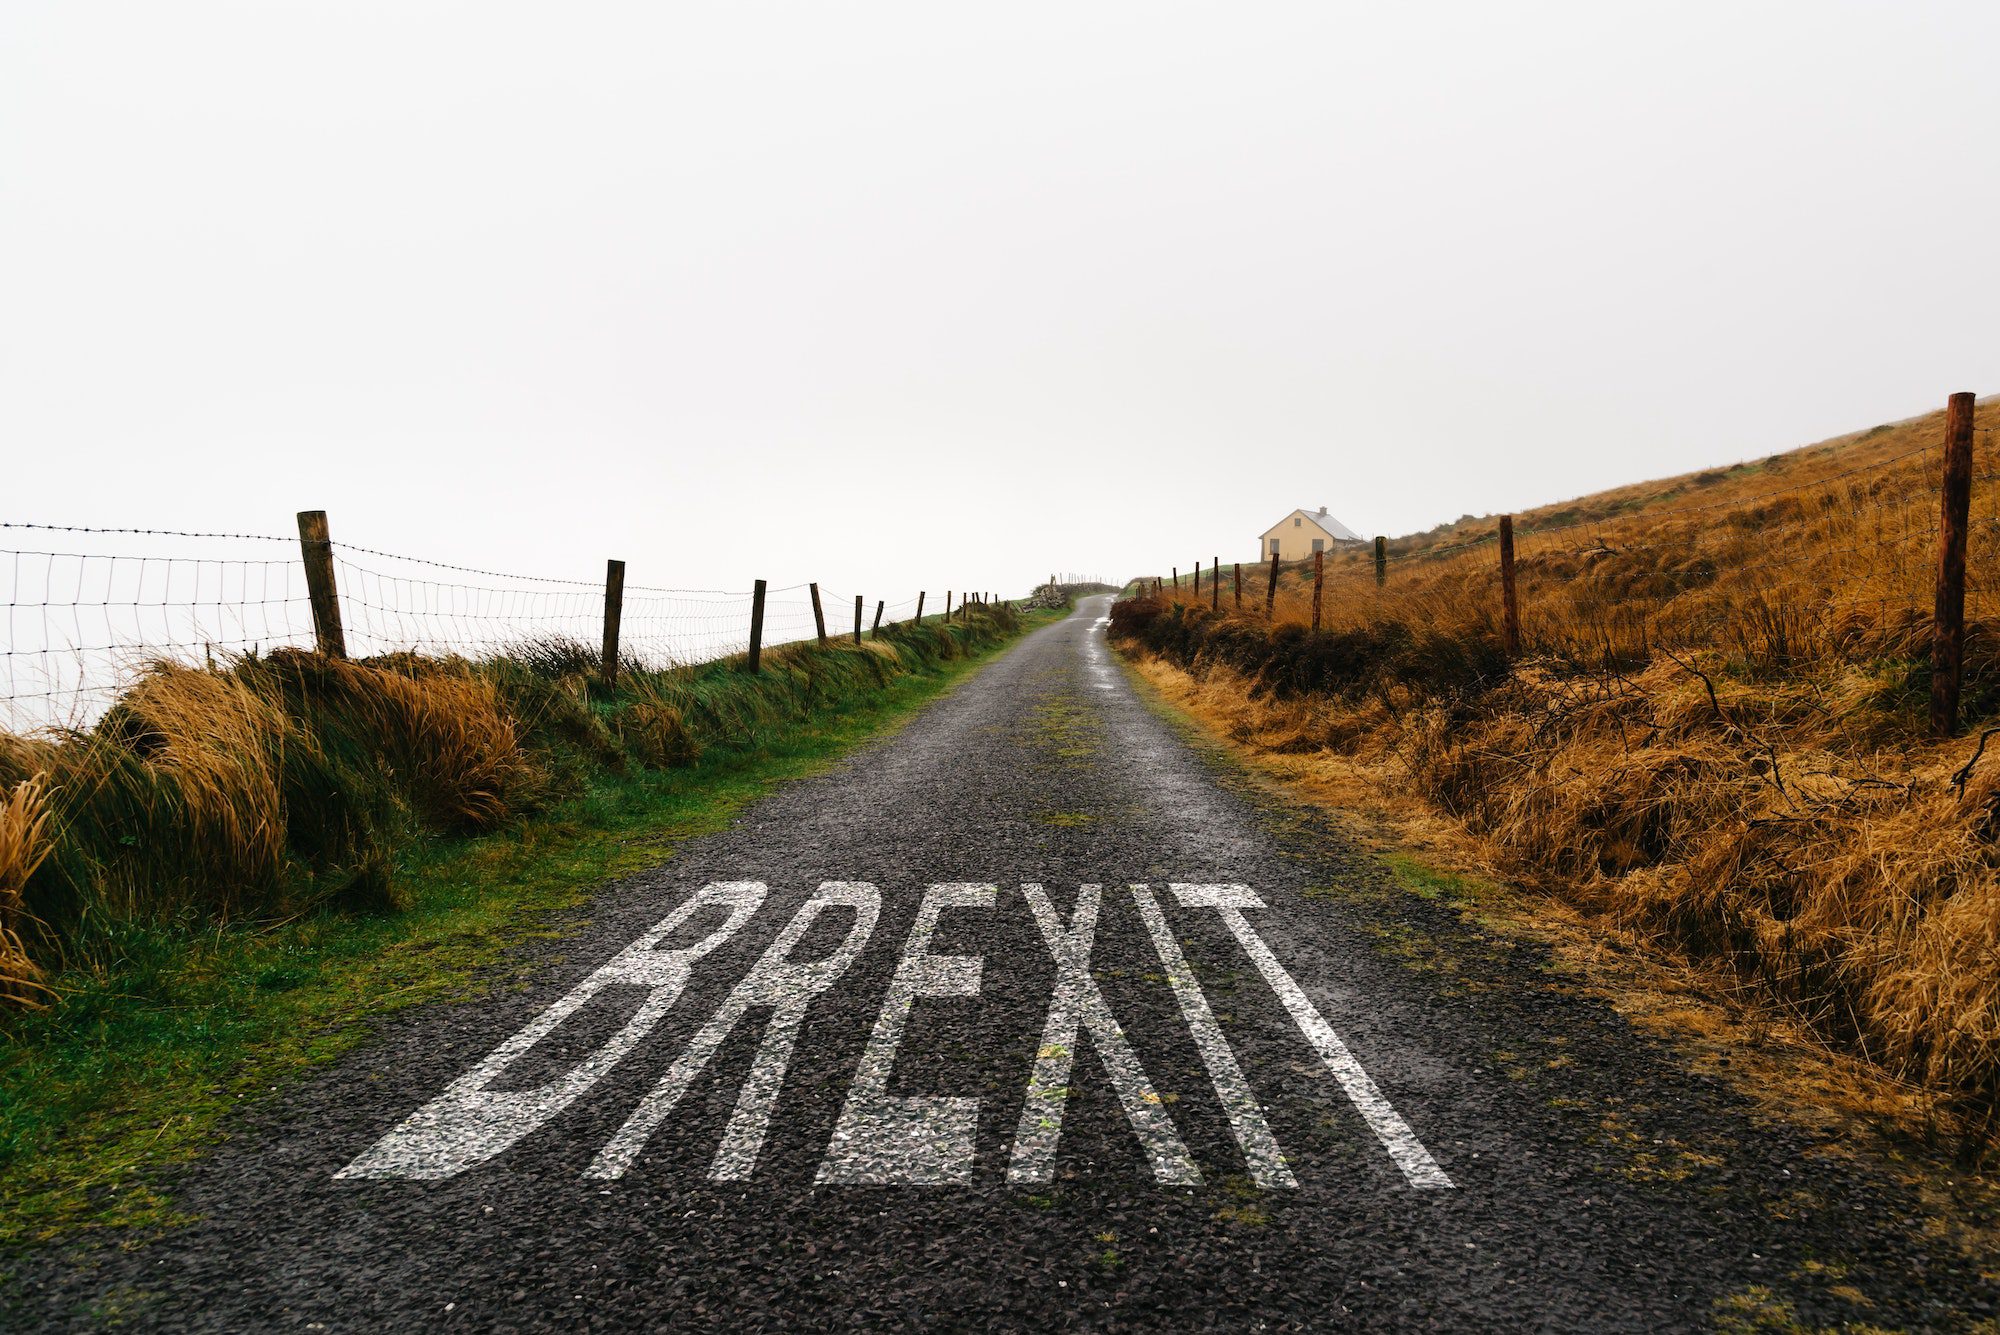 Road marking with the word Brexit painted